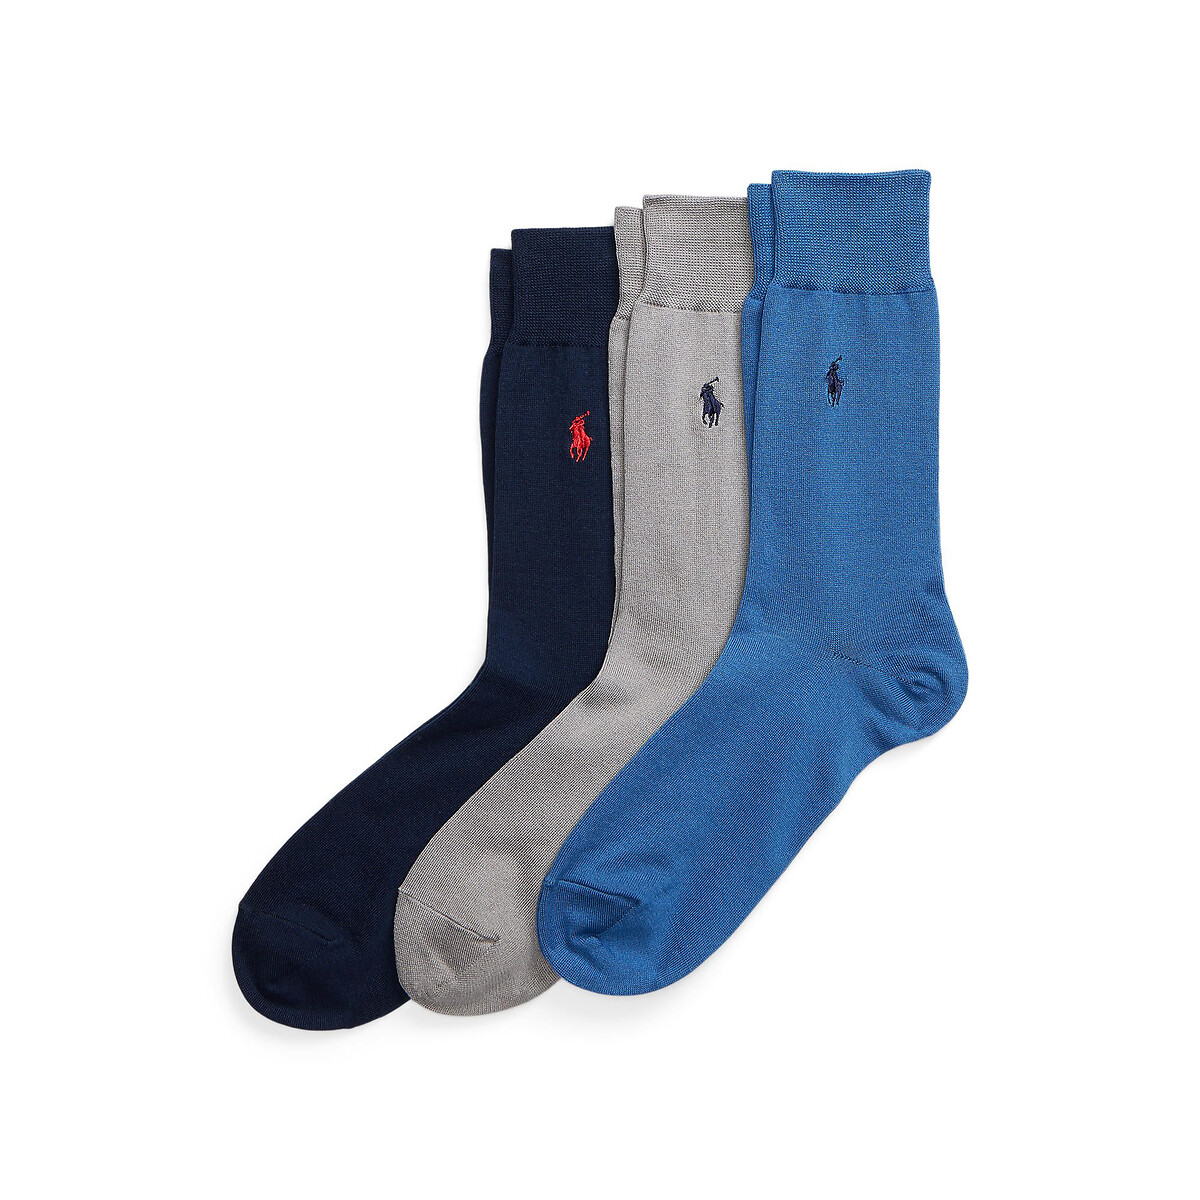 Image of Pack of 3 Pairs of Lisle Socks in Cotton Mix